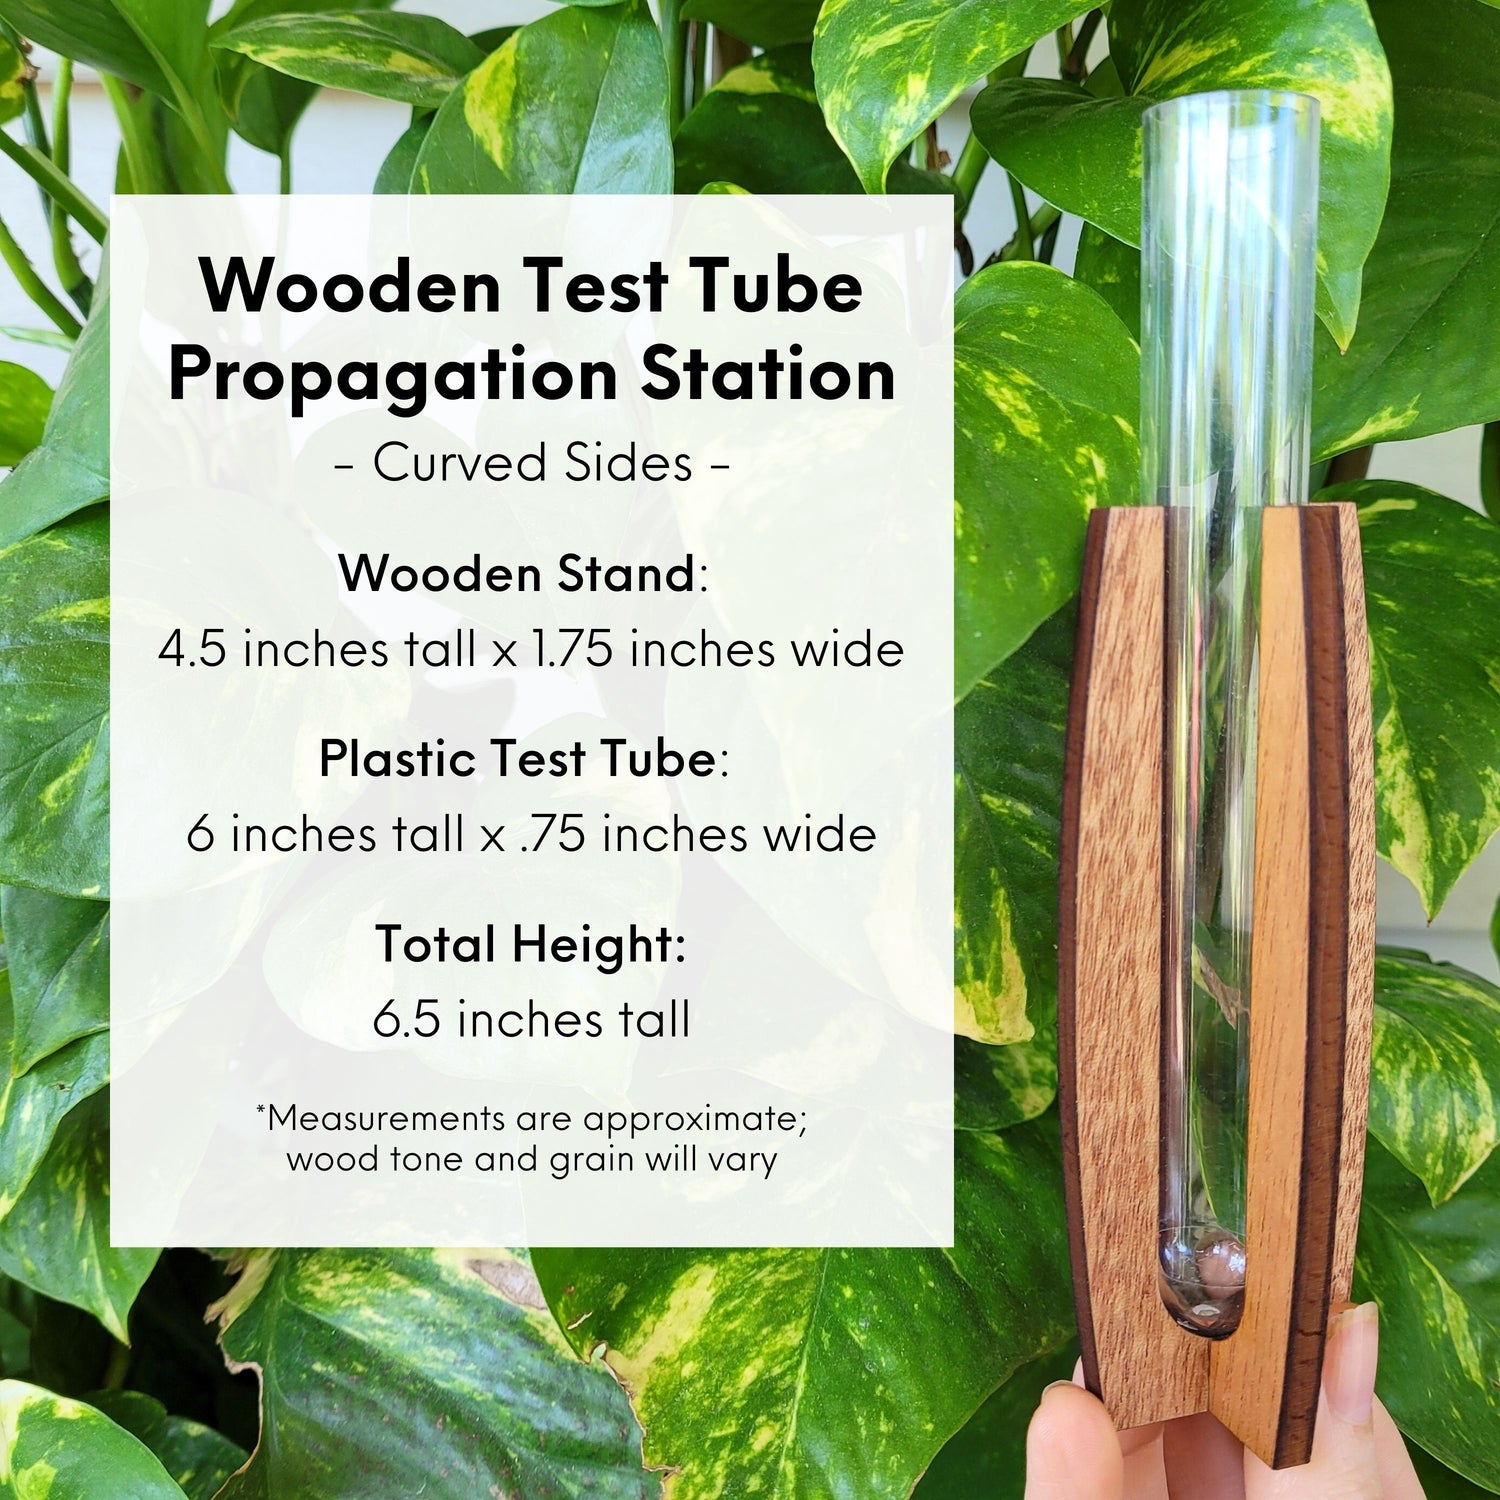 Size information for the test tube stand with curved sides that matches the measurements provided in the written description.